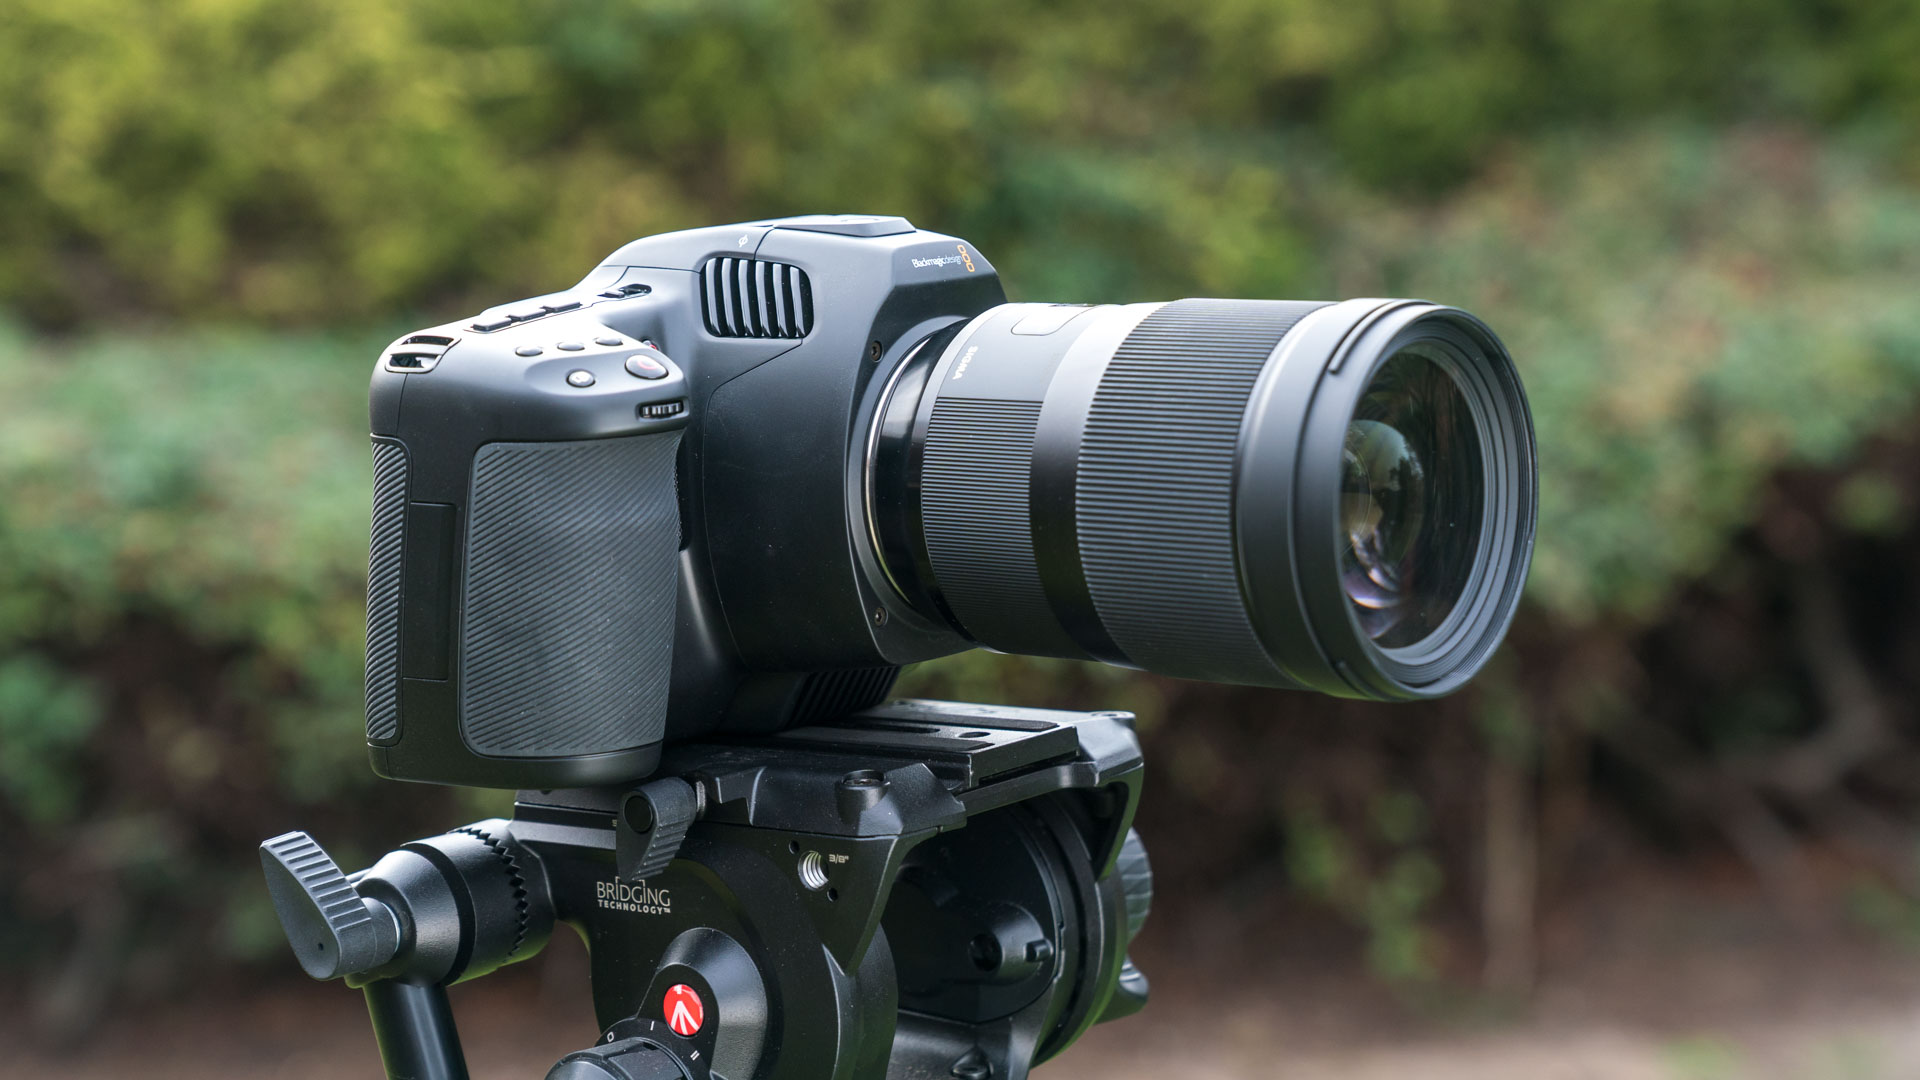 Blackmagic Pocket 6K Pro review: Pro-grade performance on an indie budget